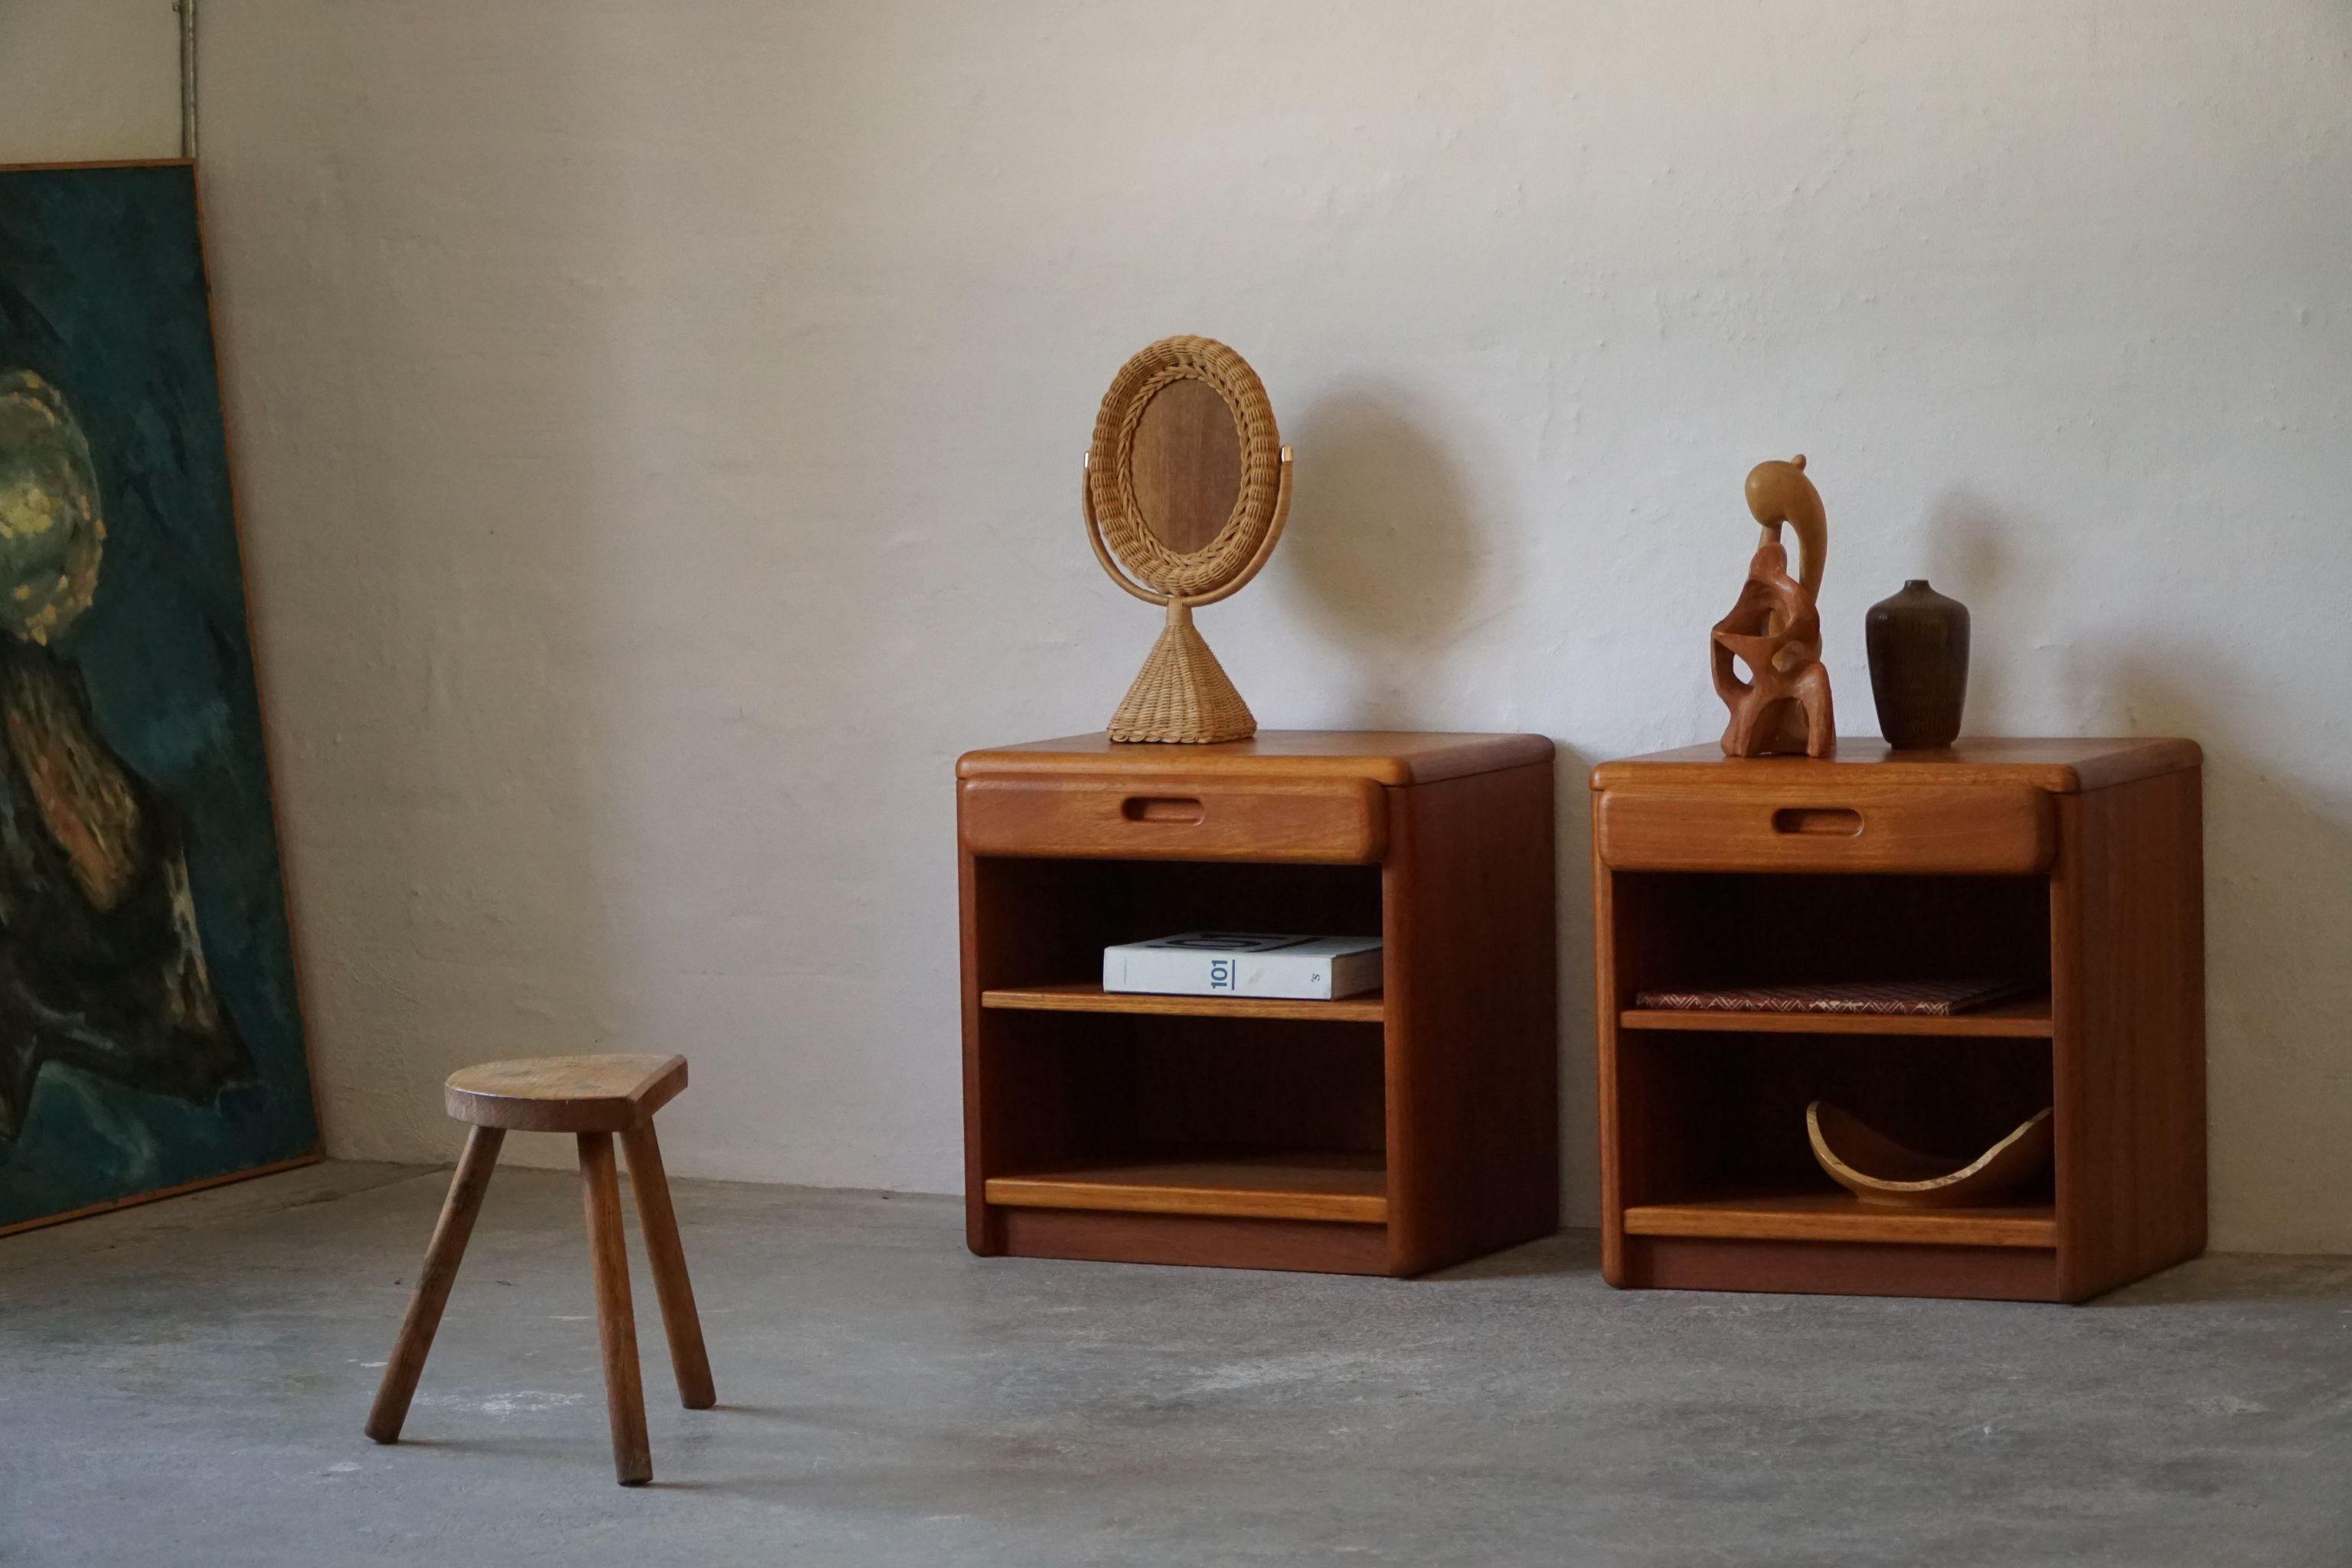 A fine pair of night stands / side tables with drawers in solid teak, made in Denmark, ca 1960s by an unknown cabinetmaker. Stamped inside the drawer.

These night stands are in a great vintage condition with only a few signs of wear.

With a